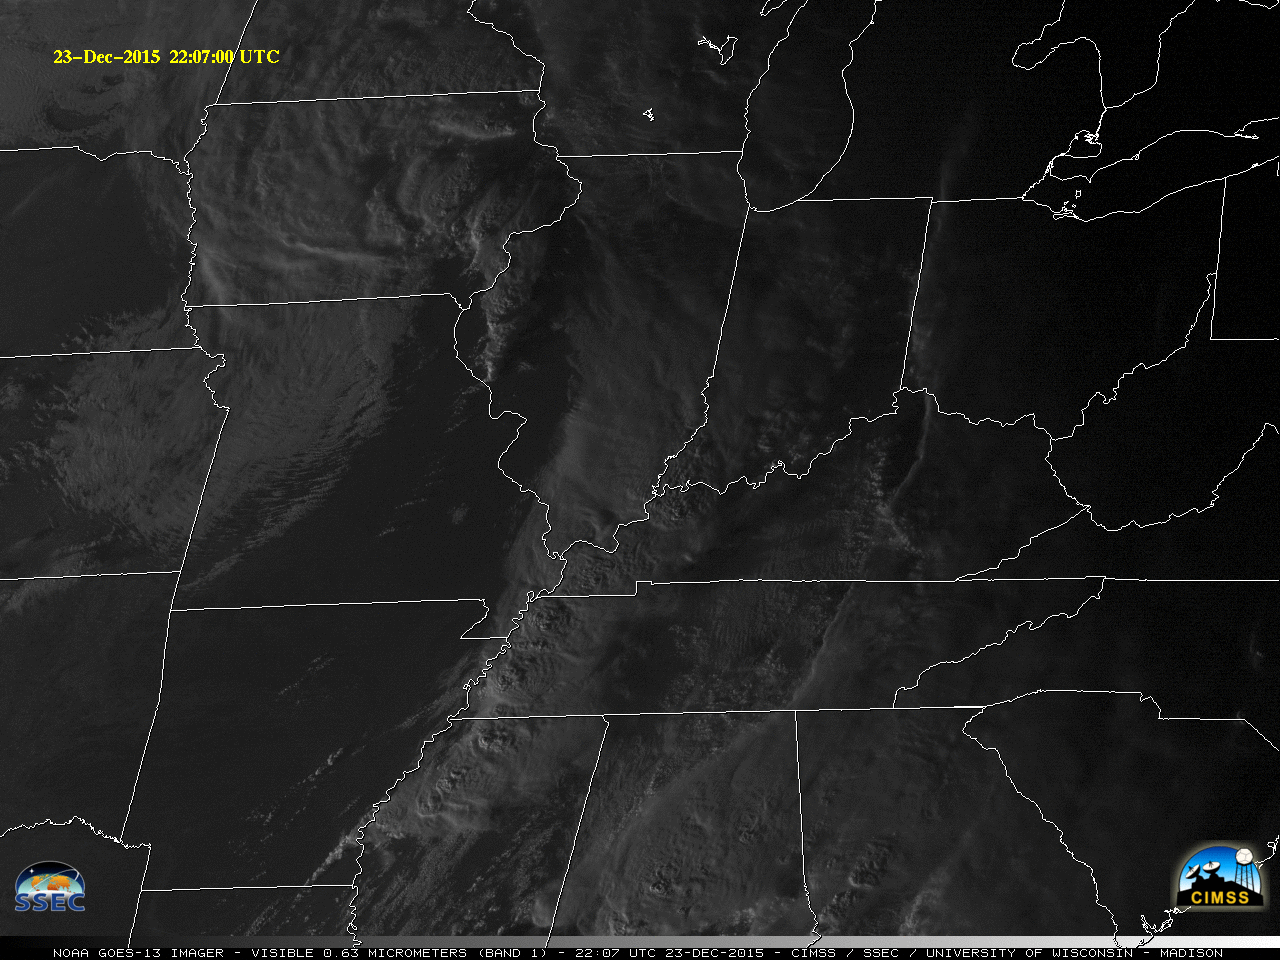 GOES-13 Visible (0.63 µm) images [click to play animation]